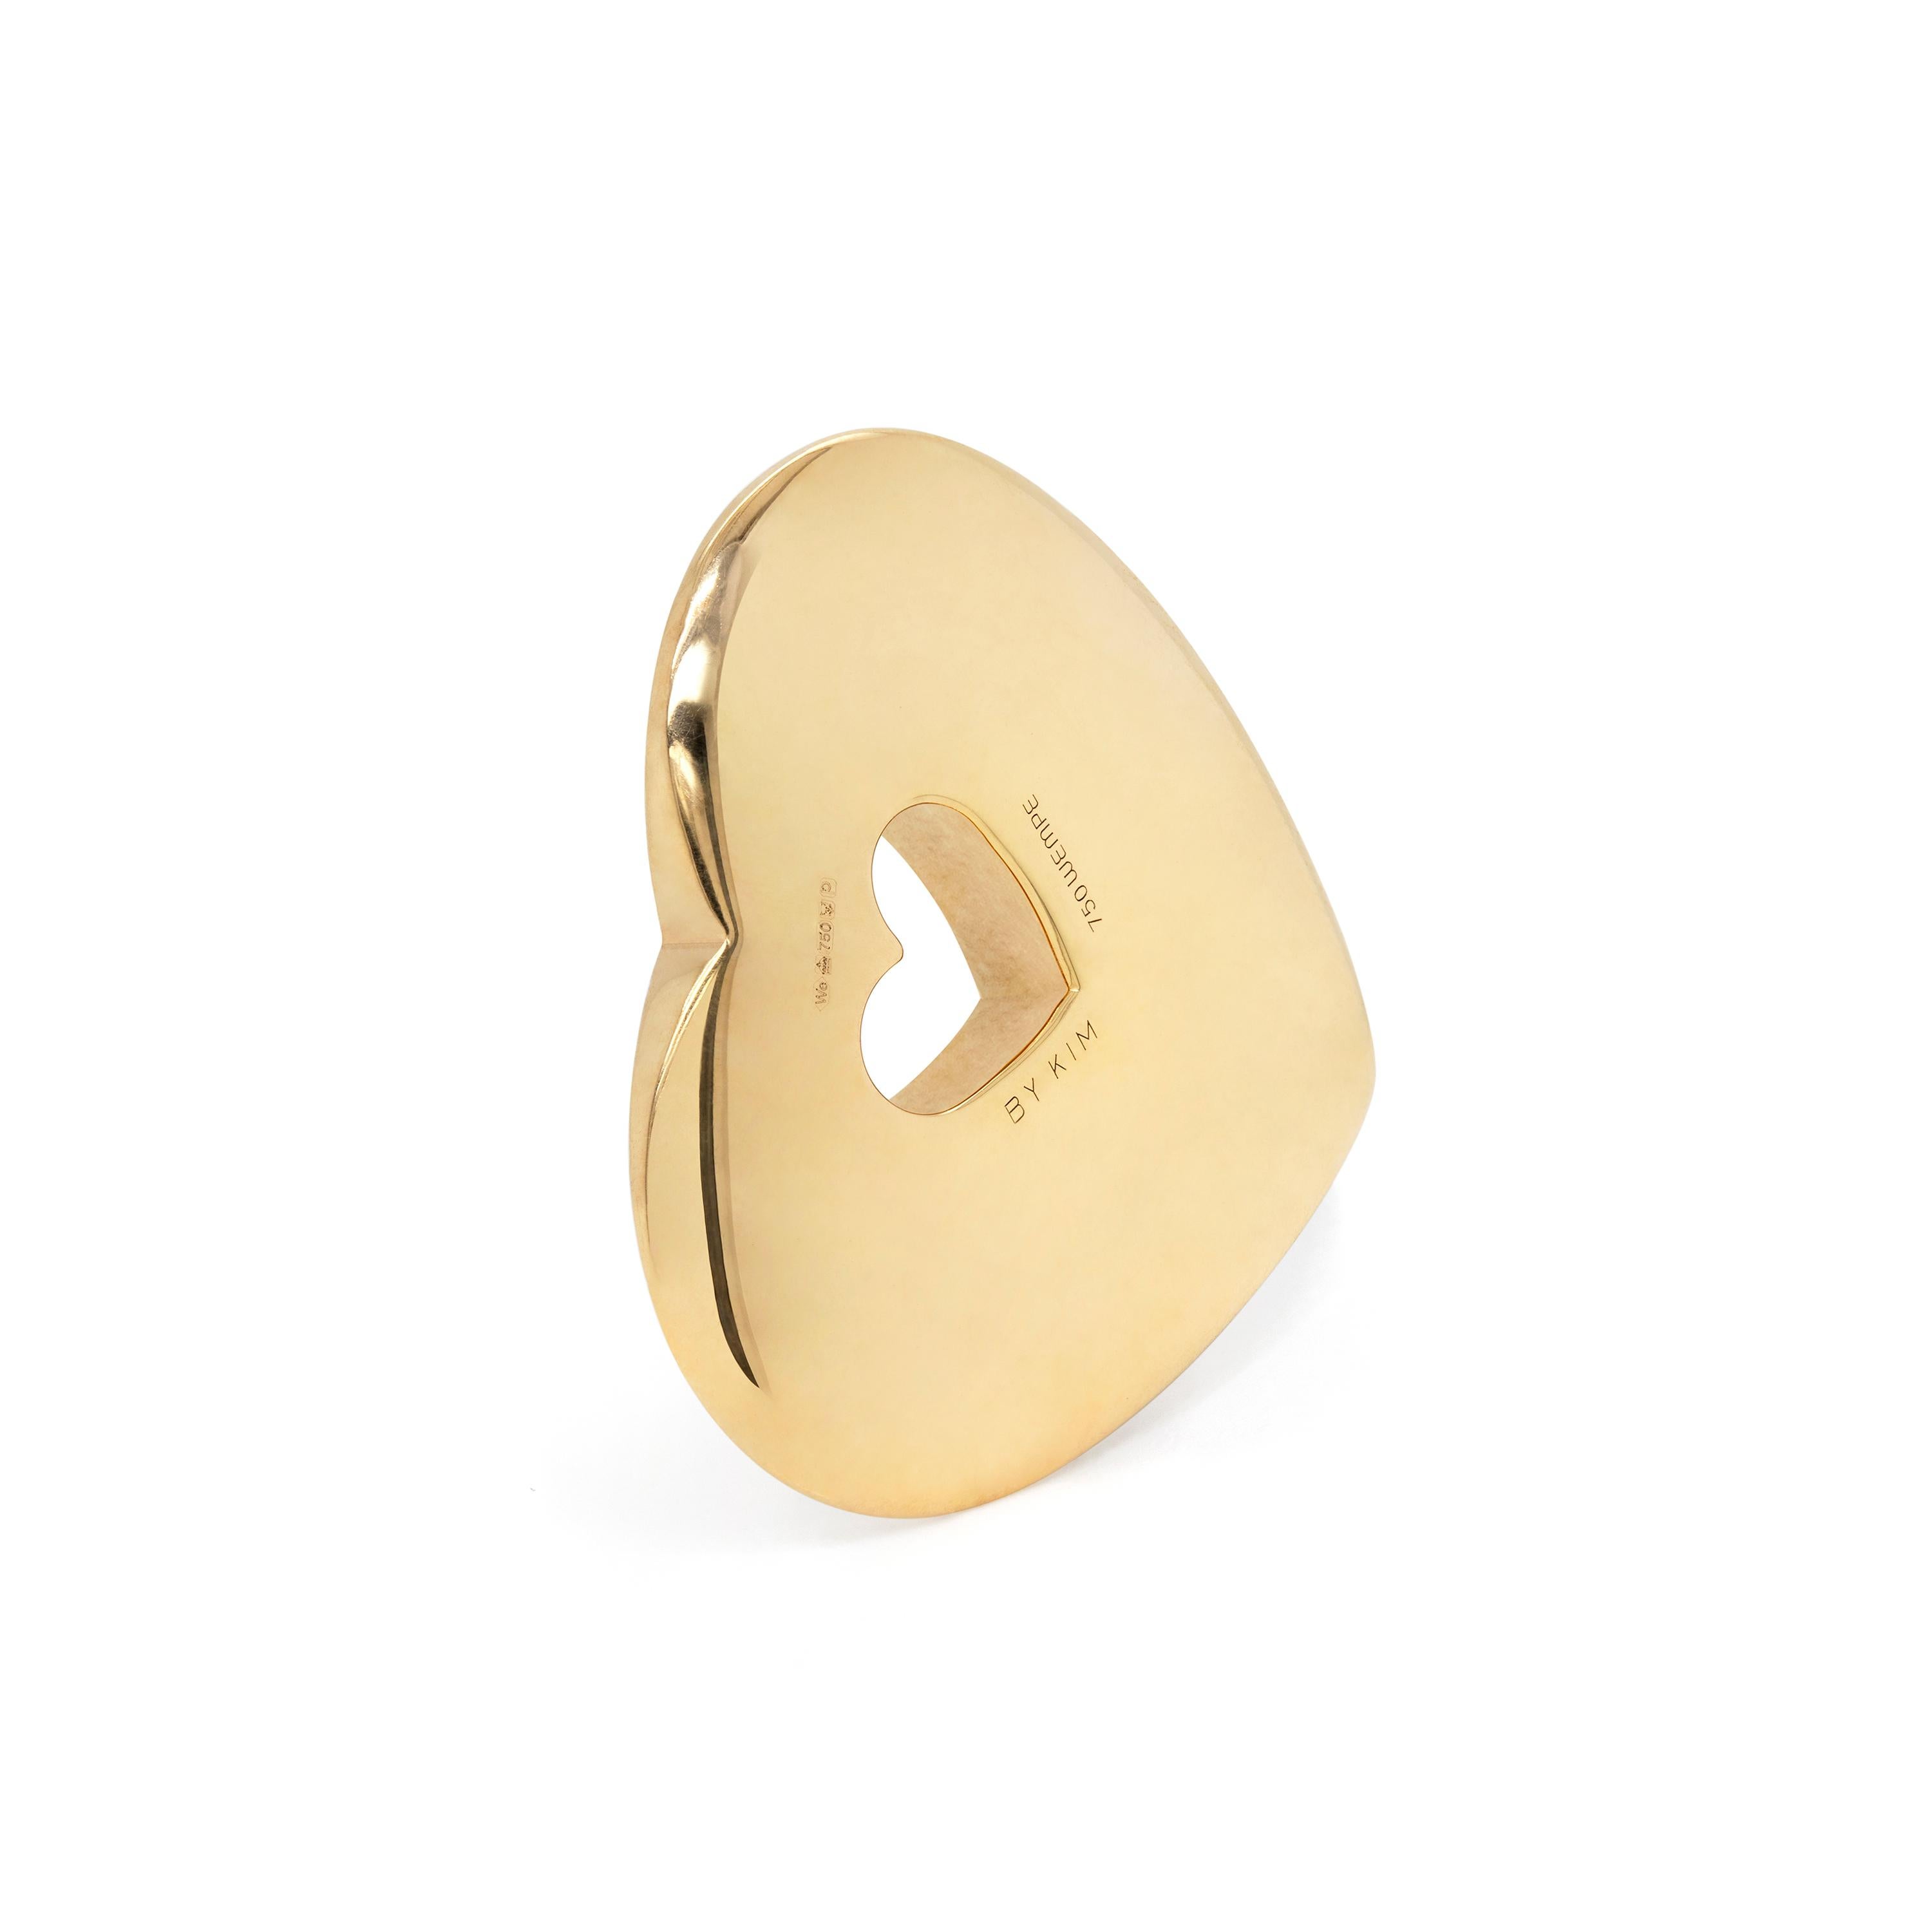 This stunning pendant by famous London jewellers, WEMPE is a solid 18 carat yellow gold heart with a heart cut out in the centre. The piece is engraved ‘AMOR MANET’ with the ‘O’ invisible set with a round brilliant cut diamond, estimated to weigh